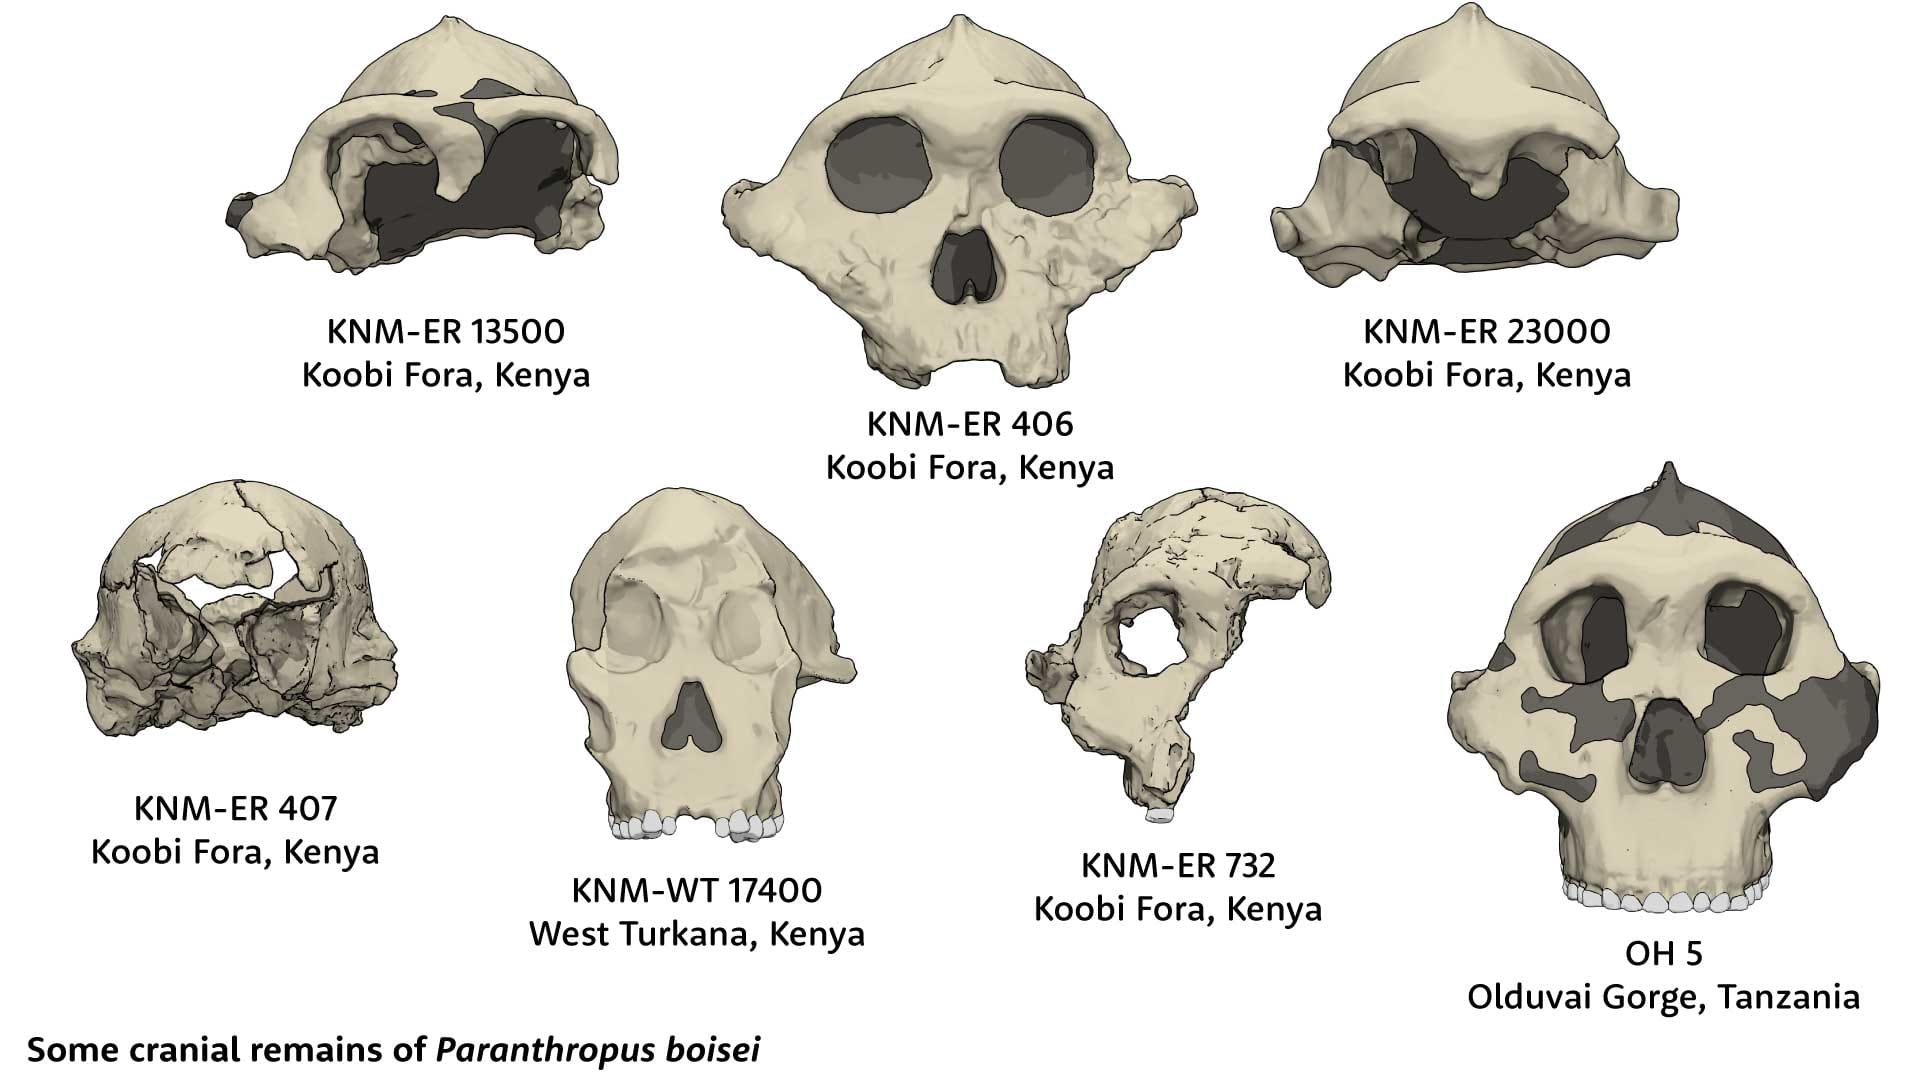 Seven skulls attributed to Paranthropus boisei. Top row: KNM-ER 13500, KNM-ER 406, and KNM-ER 23000. Bottom row: KNM-ER 407, KNM-WT 17400, KNM-ER 732, and OH 5